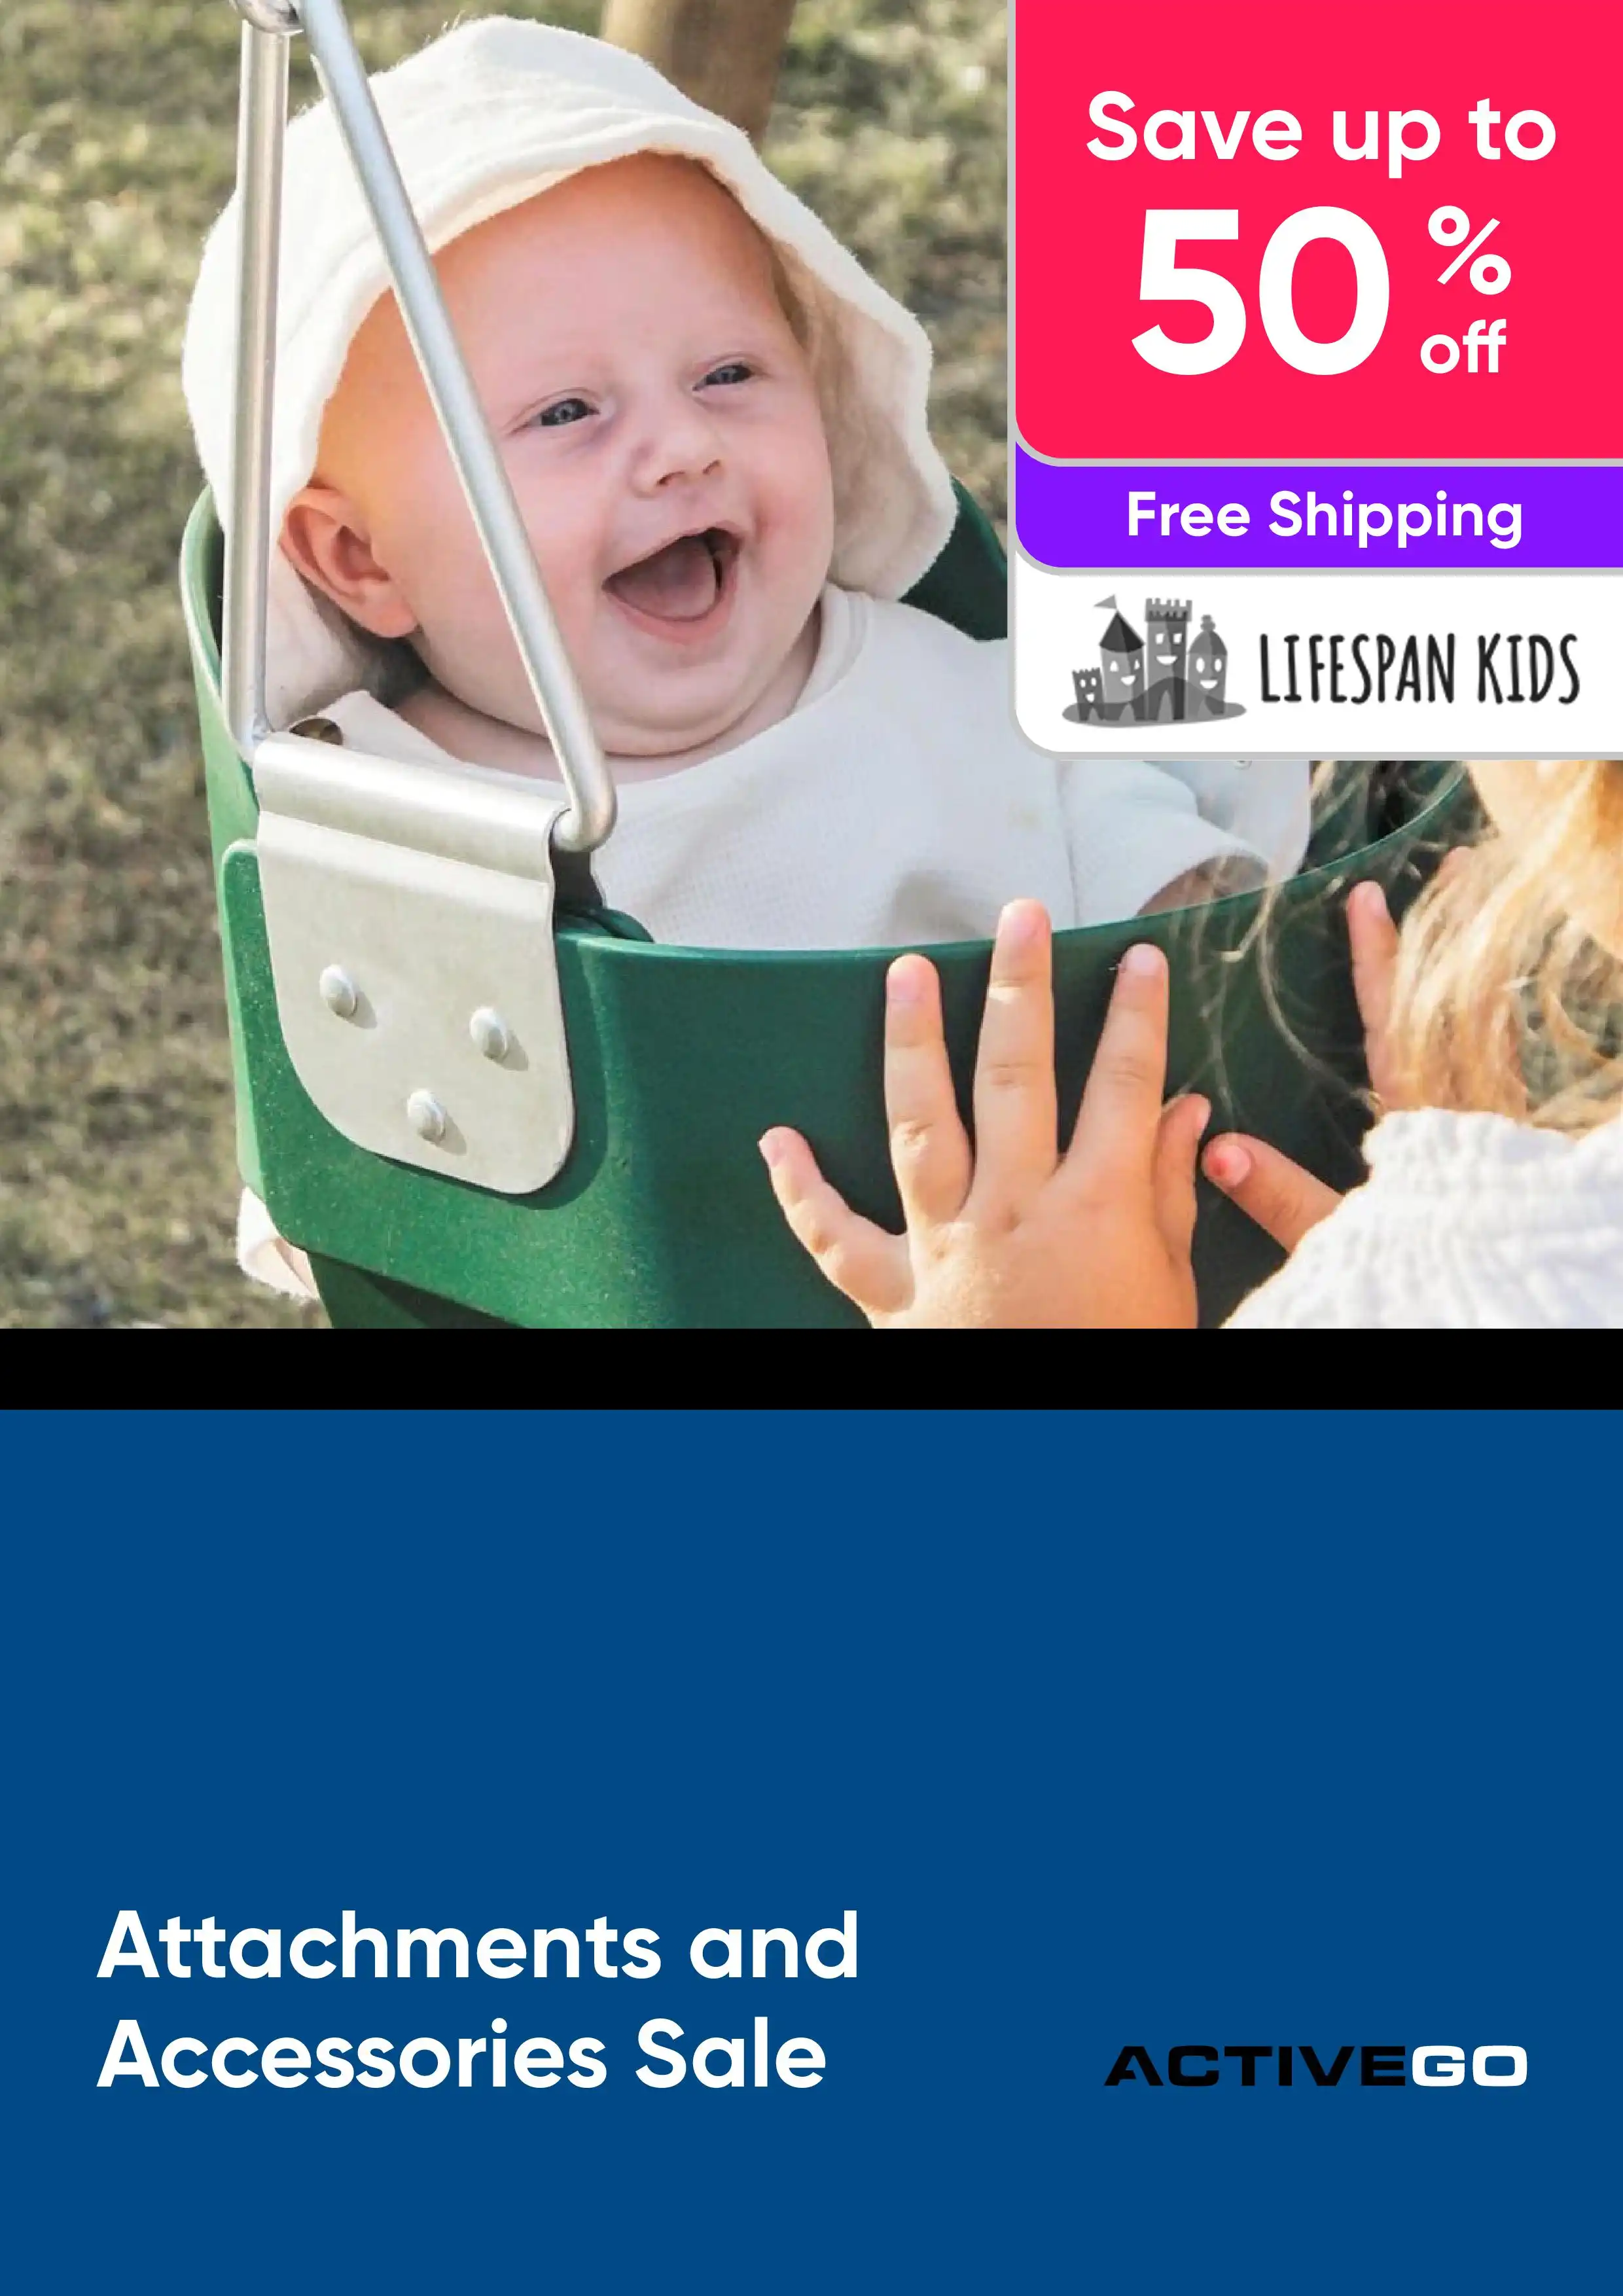 Attachments and Accessories Sale - Lifespan Kids - Save up to 50% off